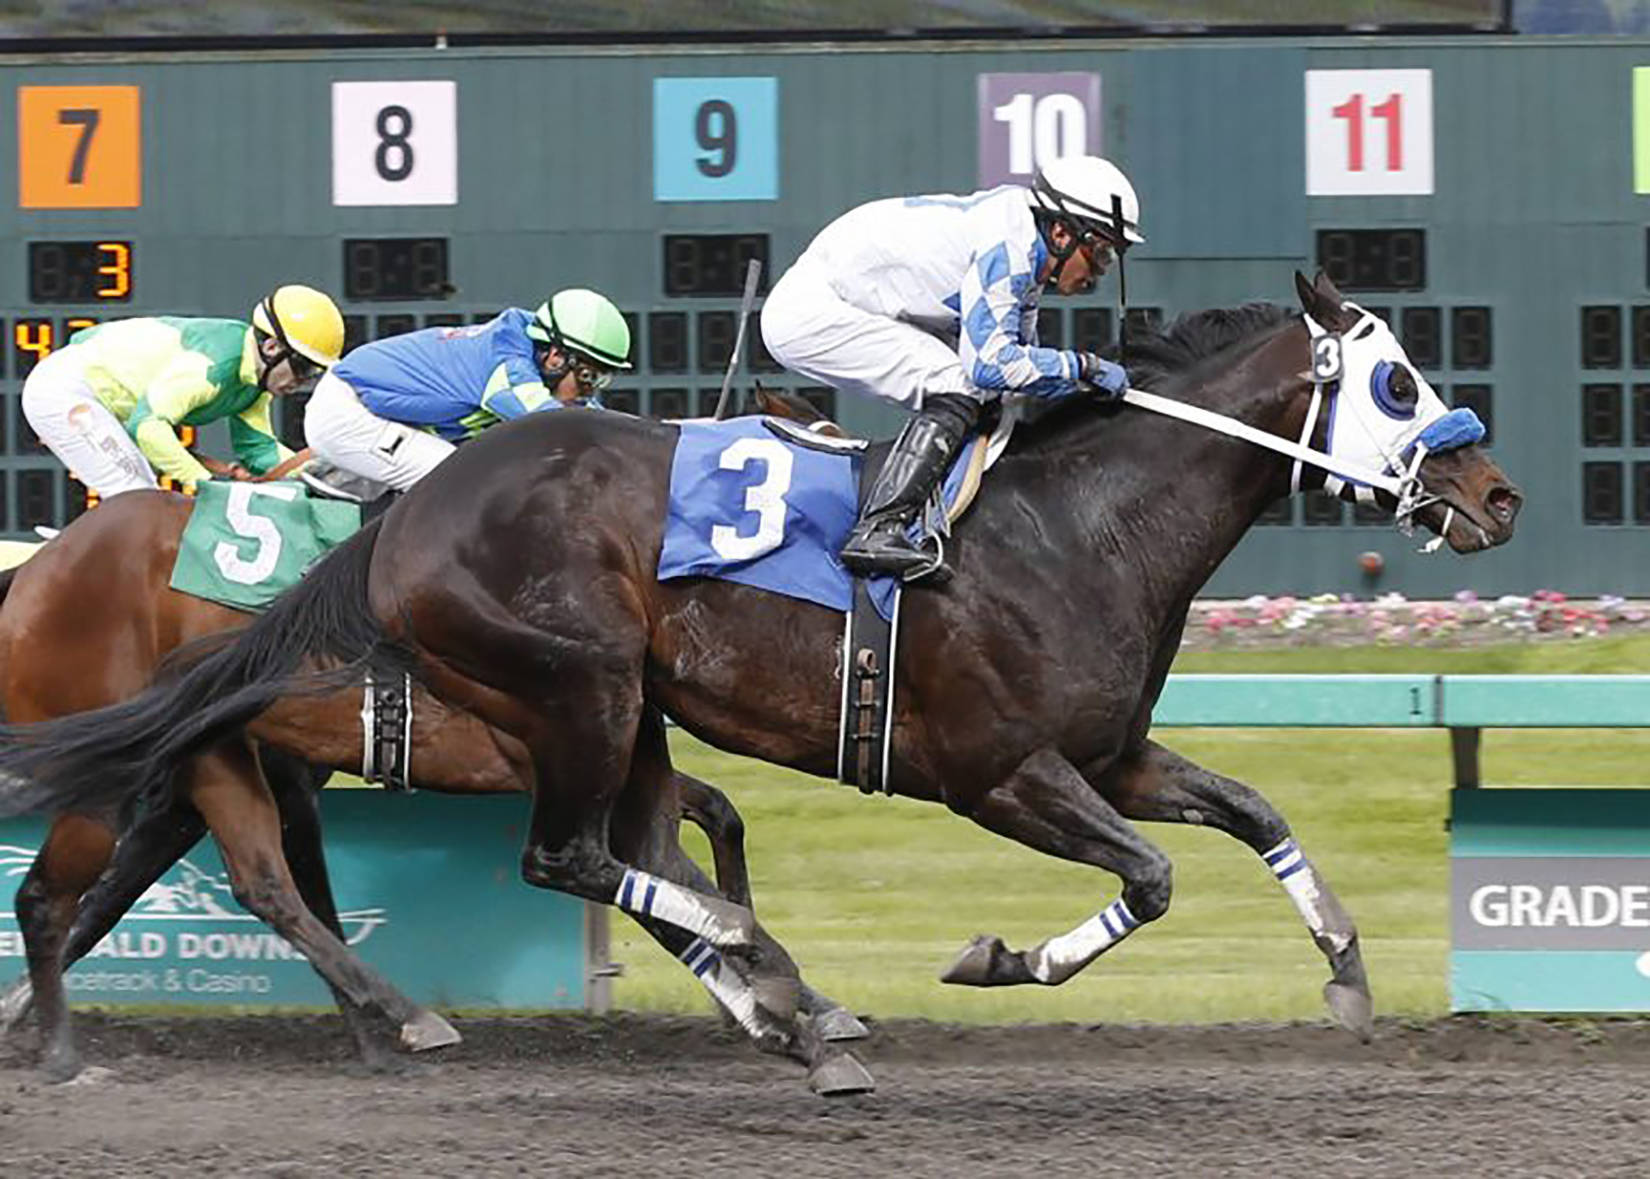 Leonel Camacho-Flores rides Party Pooper to victory in the $15,600 John Parker Racing Purse for 3-year-olds and up at Emerald Downs. The 5-year-old Thoroughbred has won three straight races dating to last year. COURTESY PHOTO, Emerald Downs